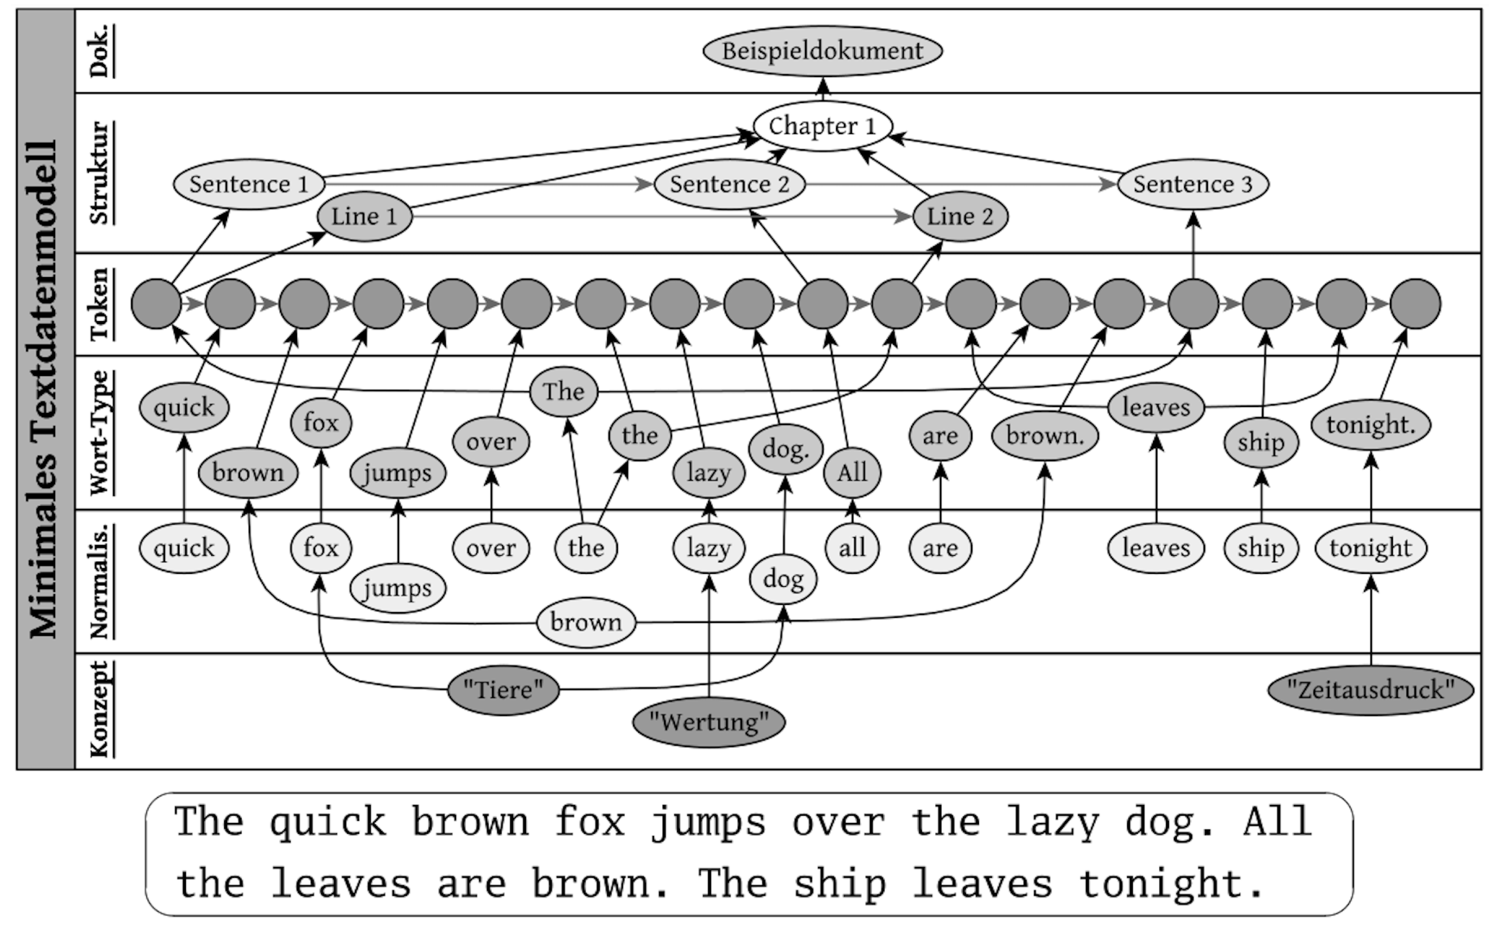 Fig. 3: Graph-based text model from (Efer 2016) p. 76